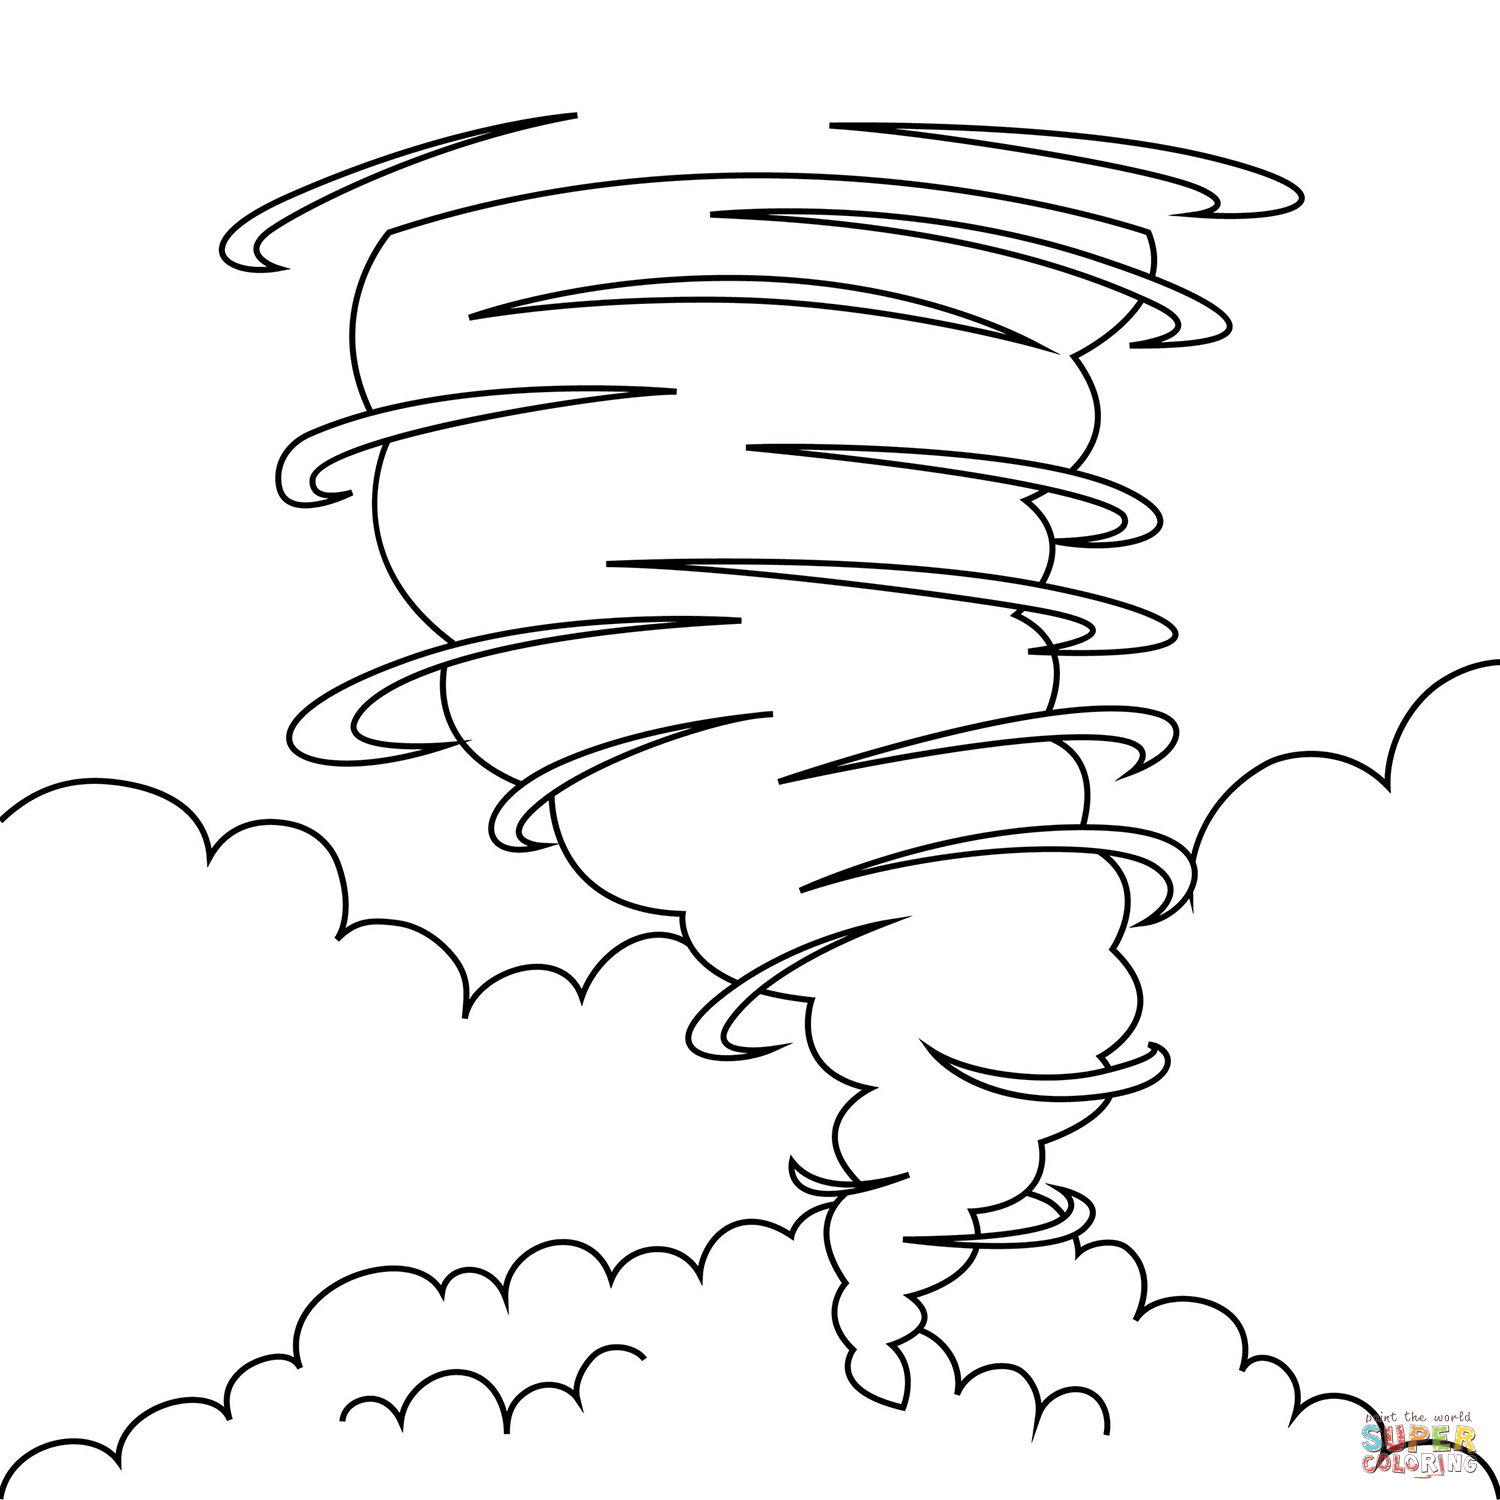 Hurricane coloring page free printable coloring pages